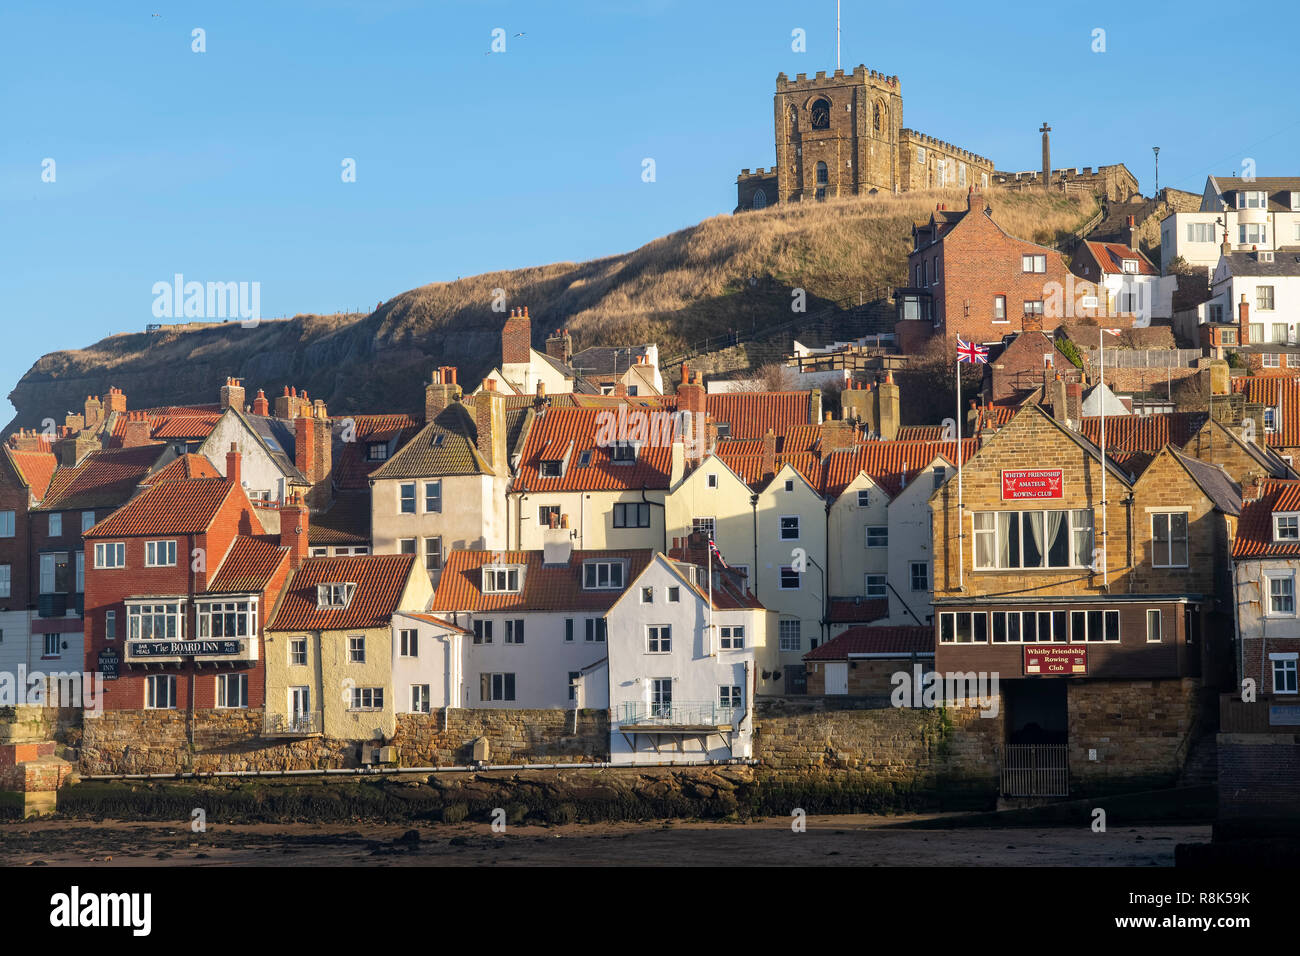 Winter sunlight on St Mary's Church and the red pantile roofs of  the Old Town Quarter, Whitby, North Yorkshire, UK Stock Photo